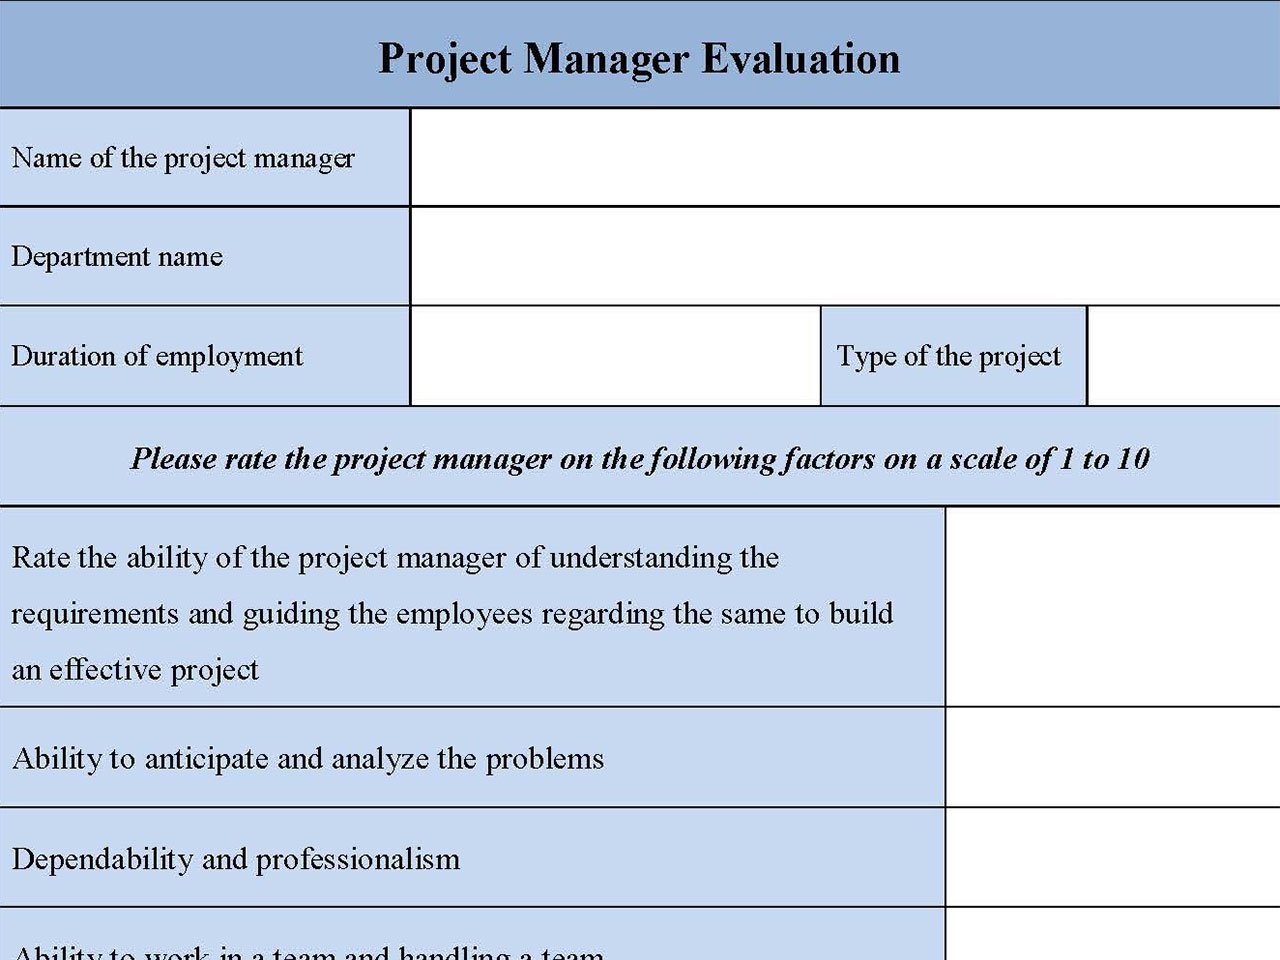 Project Manager Evaluation Form